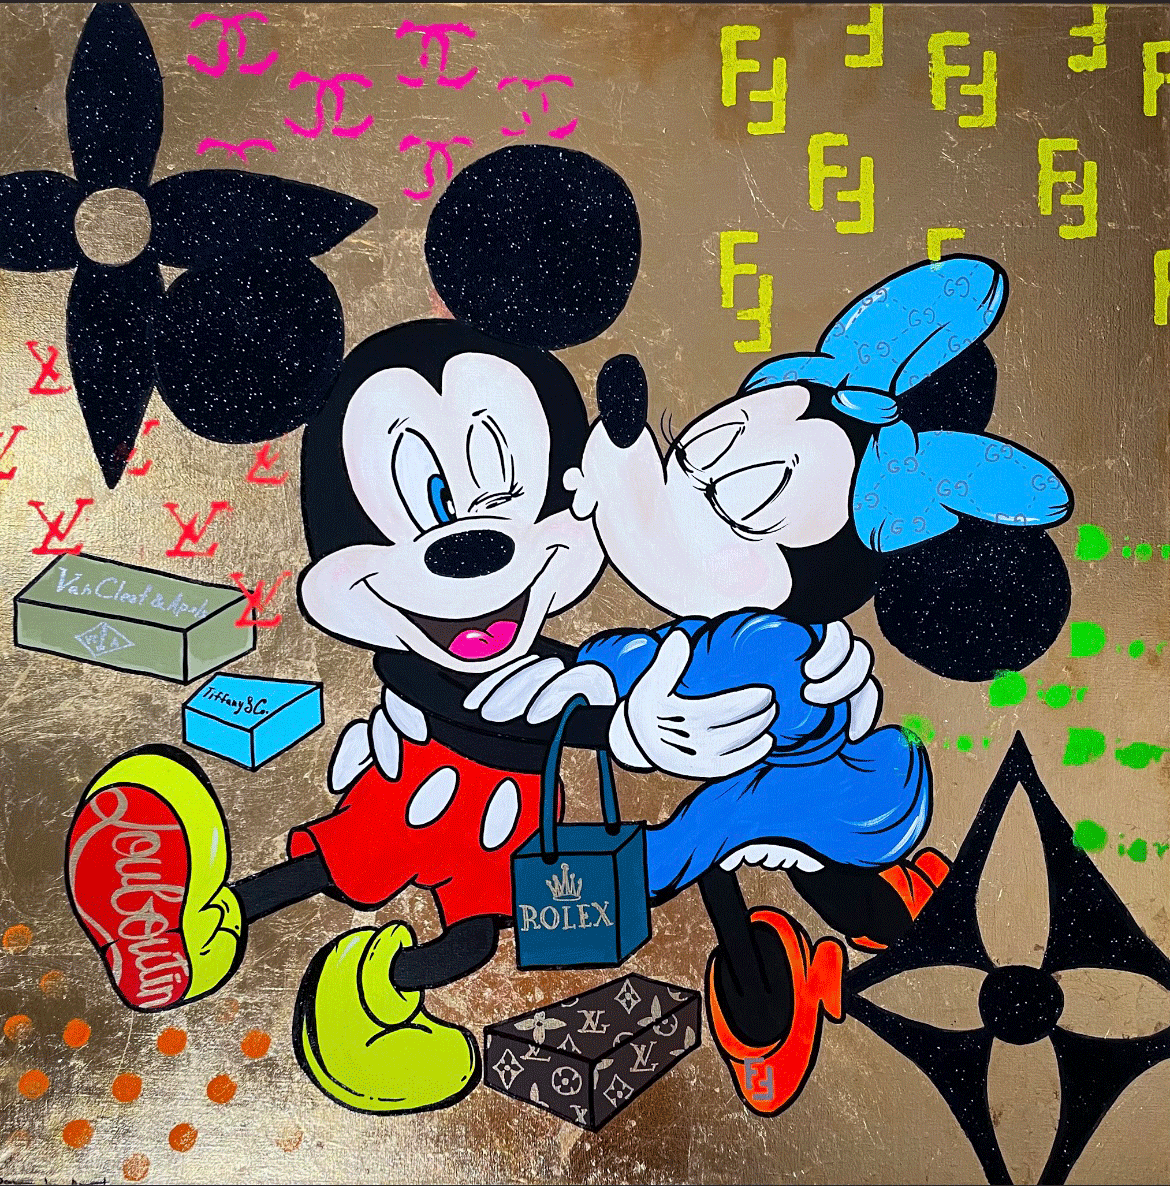 Daria Hil "Gold Kiss Mickey And Minnie Mouse"